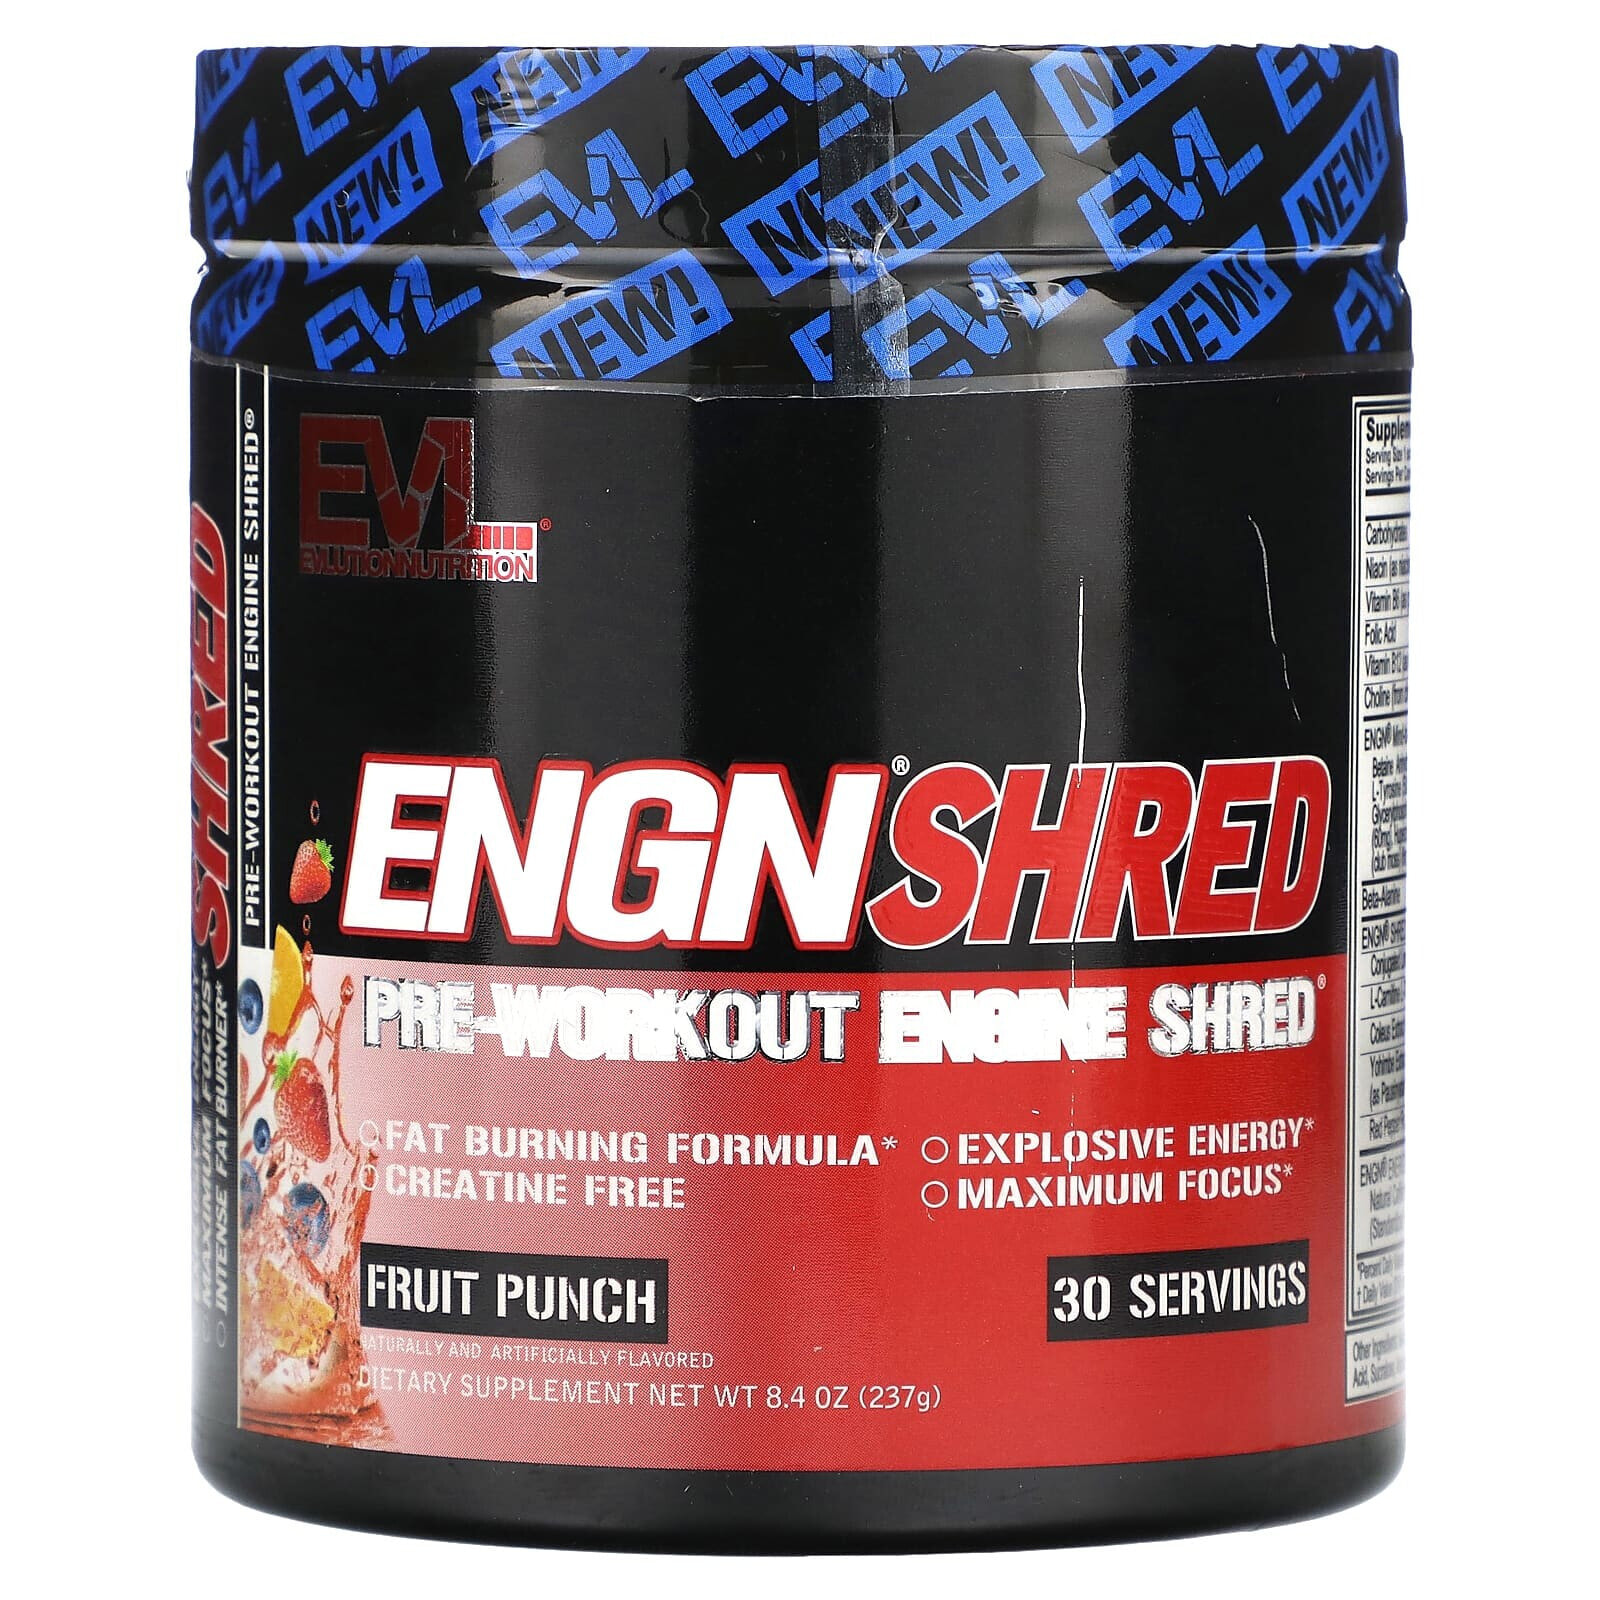 ENGN Shred, Pre-Workout Engine Shred, Cherry Limeade, 8.8 oz (249 g)